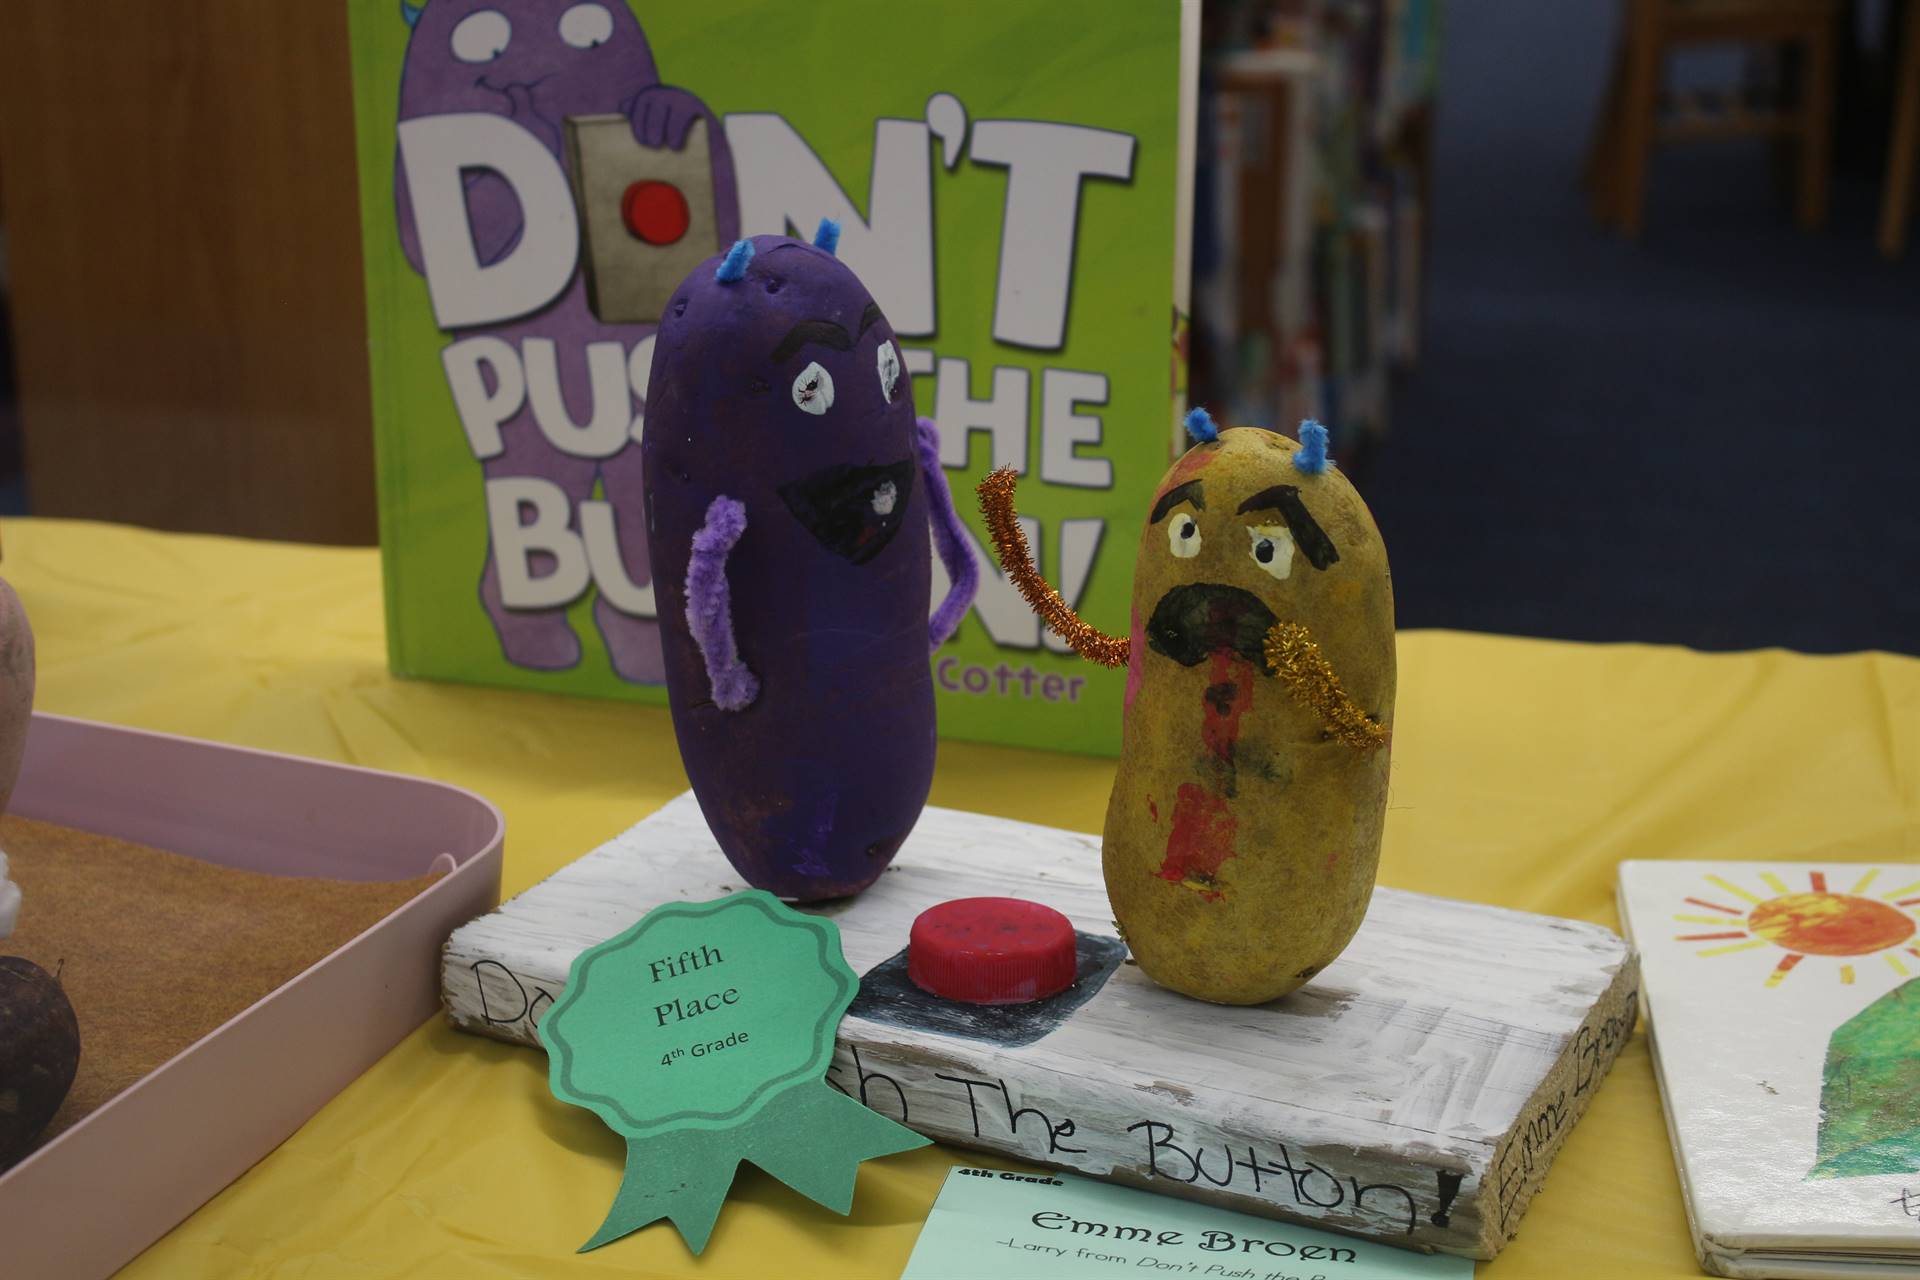 5th Place: Don’t Push the Button by Emme Brown